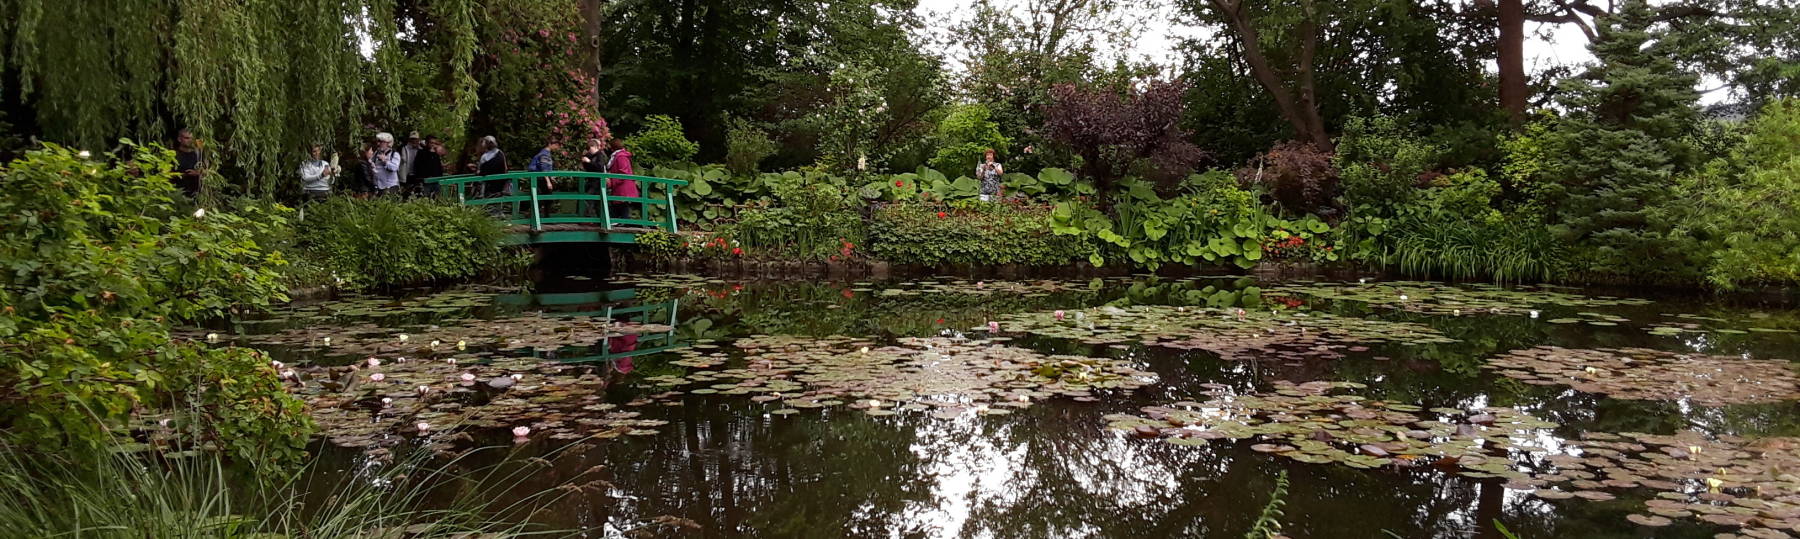 Claude Monet's water garden at Giverny.